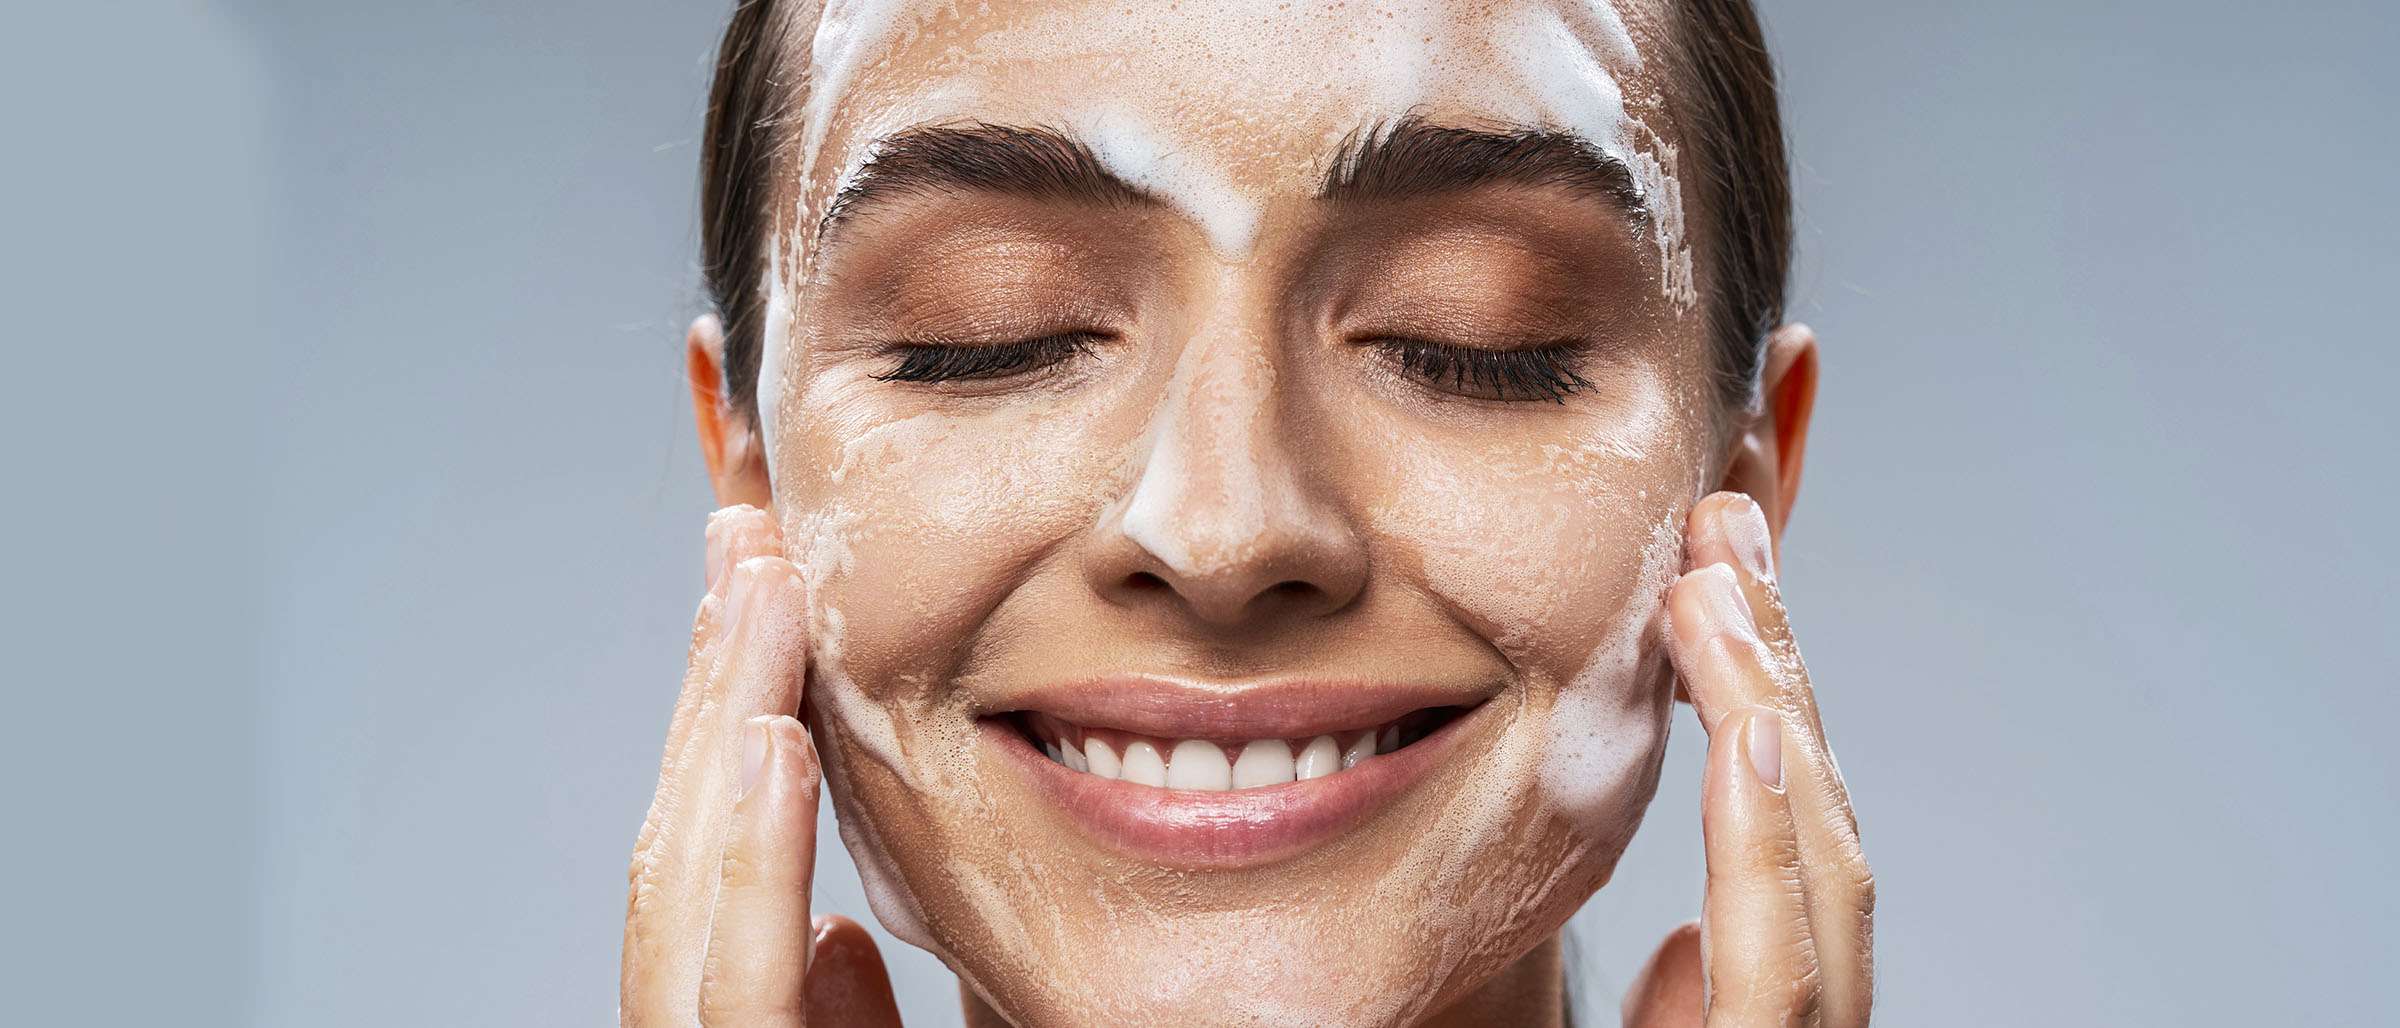 An essential daily routine for your oily, acne-prone skin